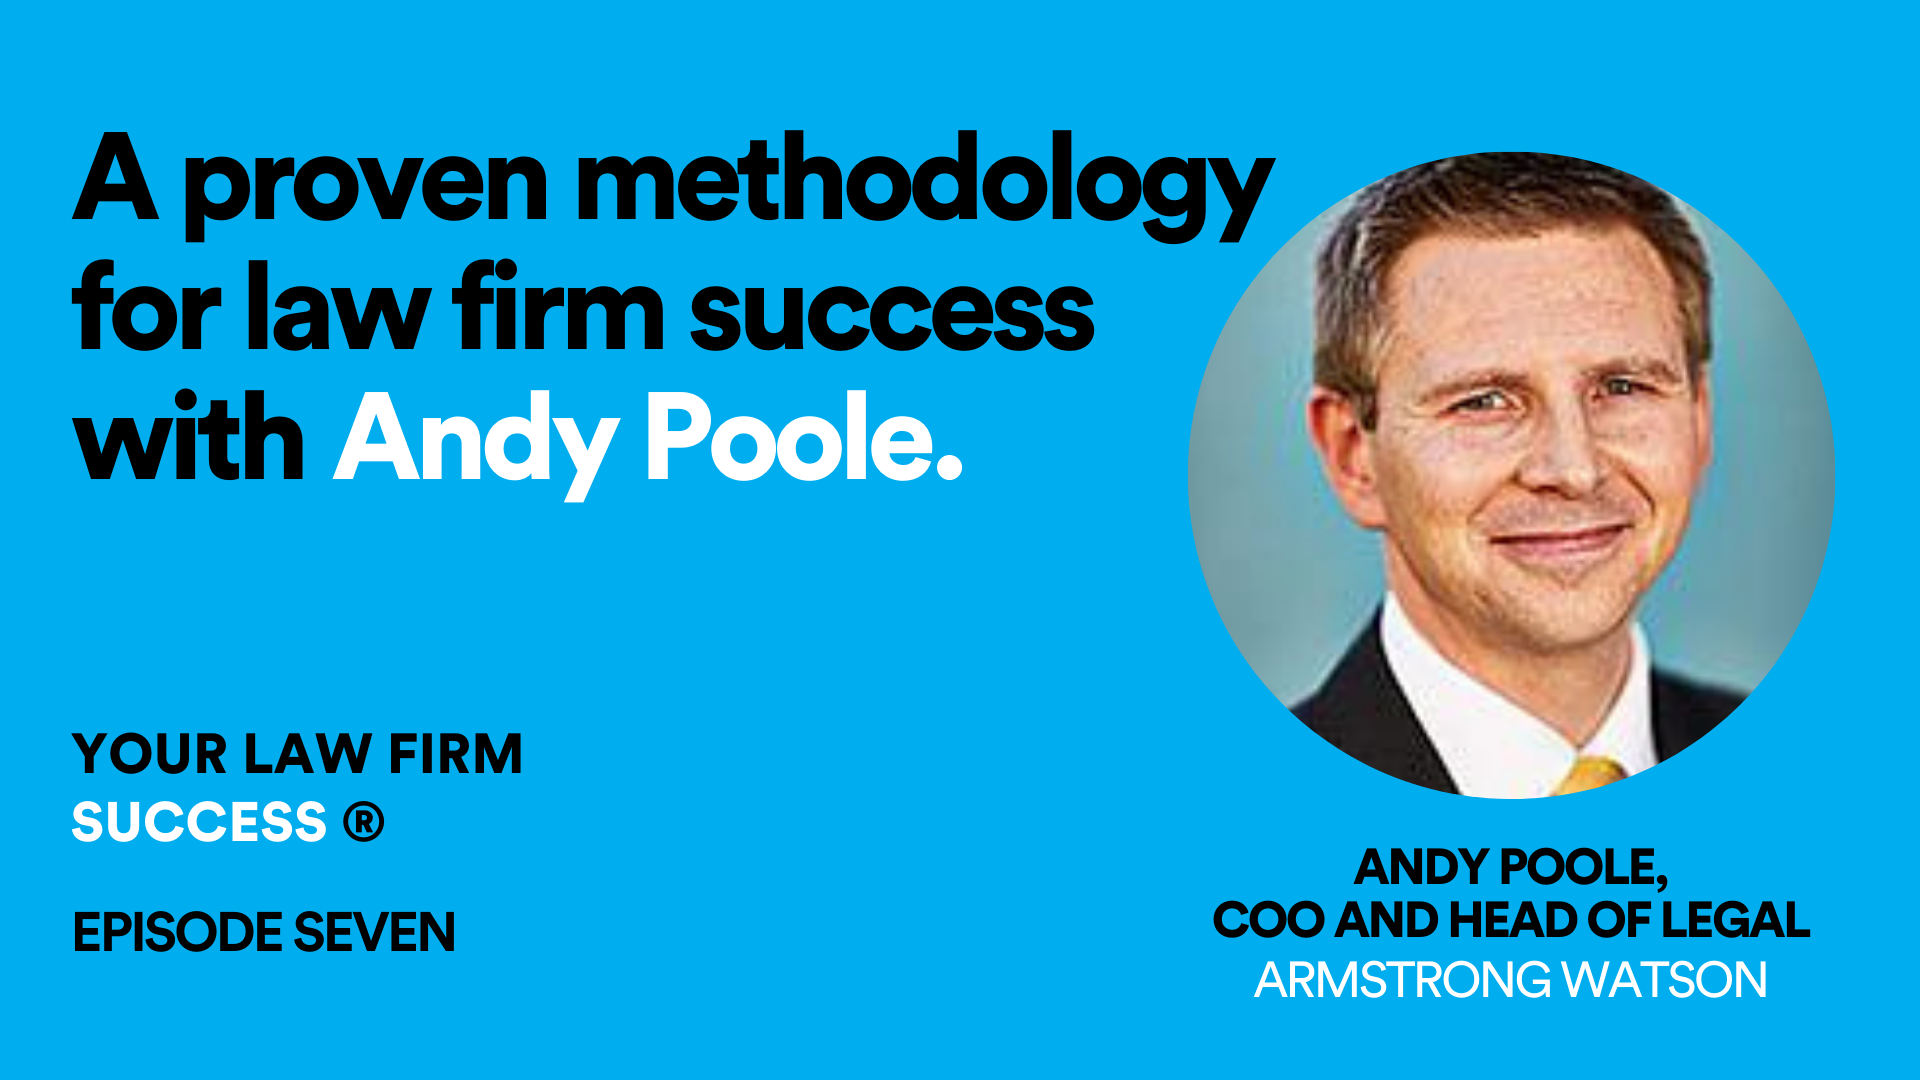 andy-poole-podcast-cover-law-firm-success